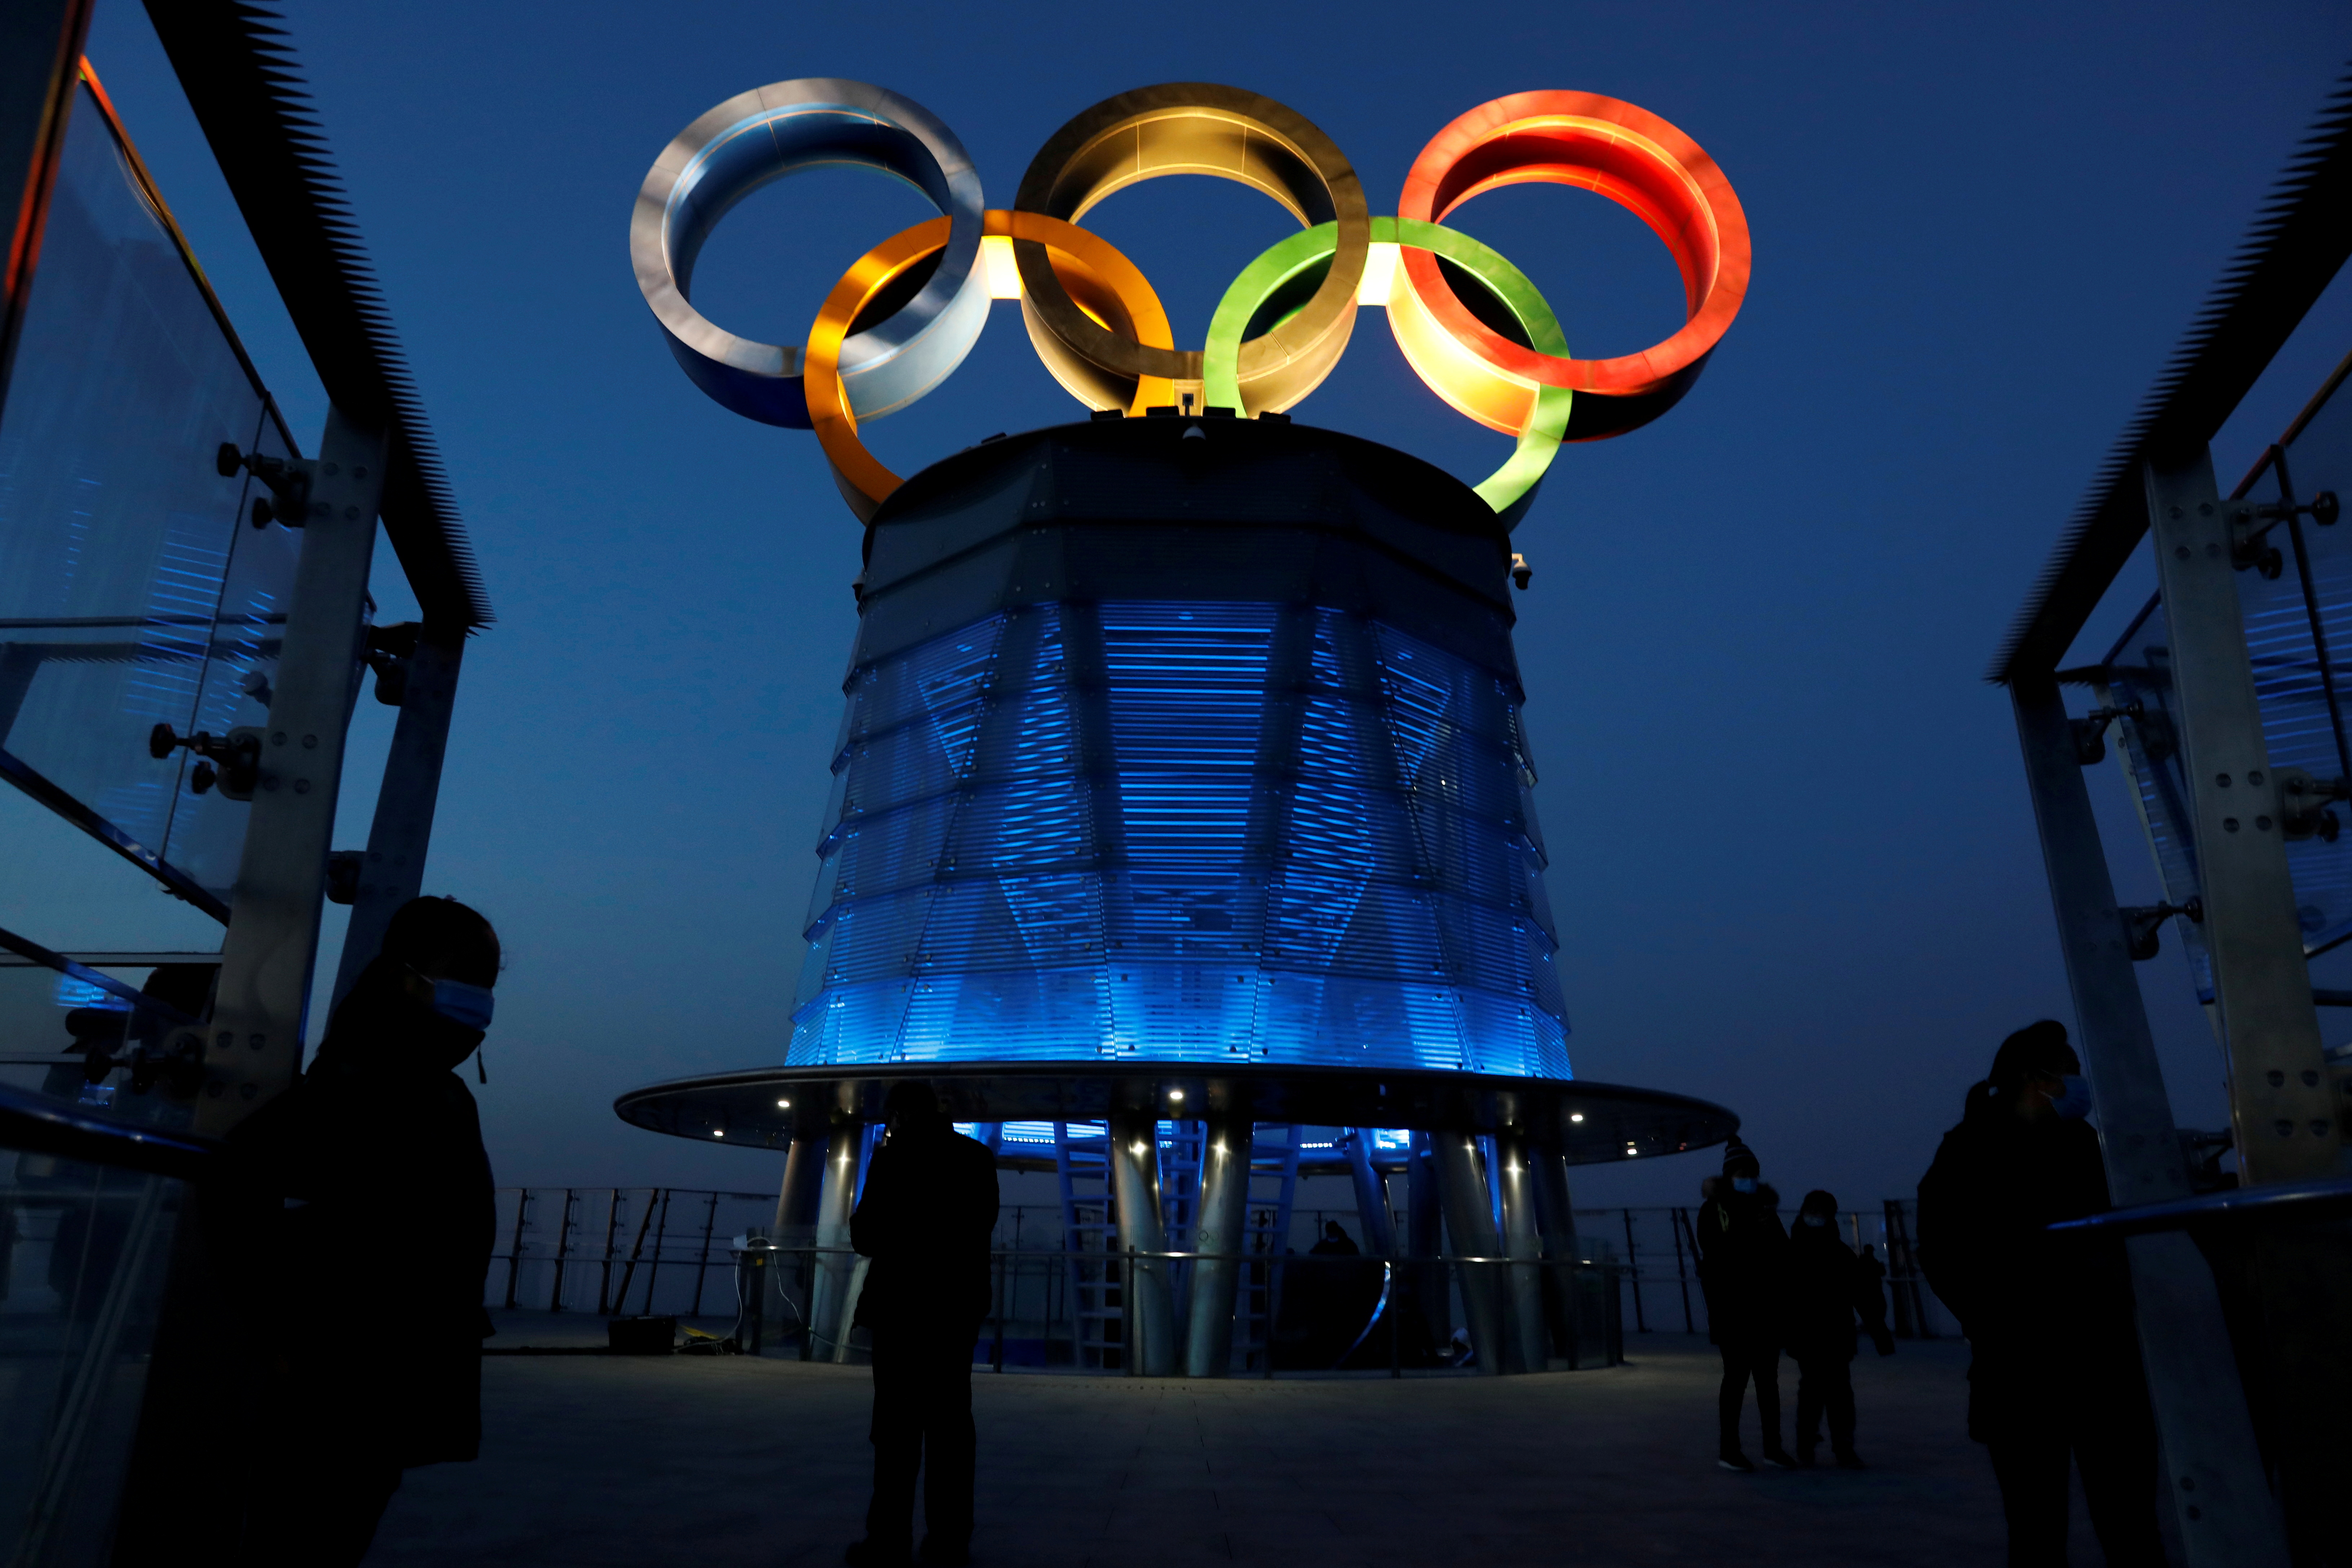 Beijing Olympics - October 27th marks 100 days remain until opening